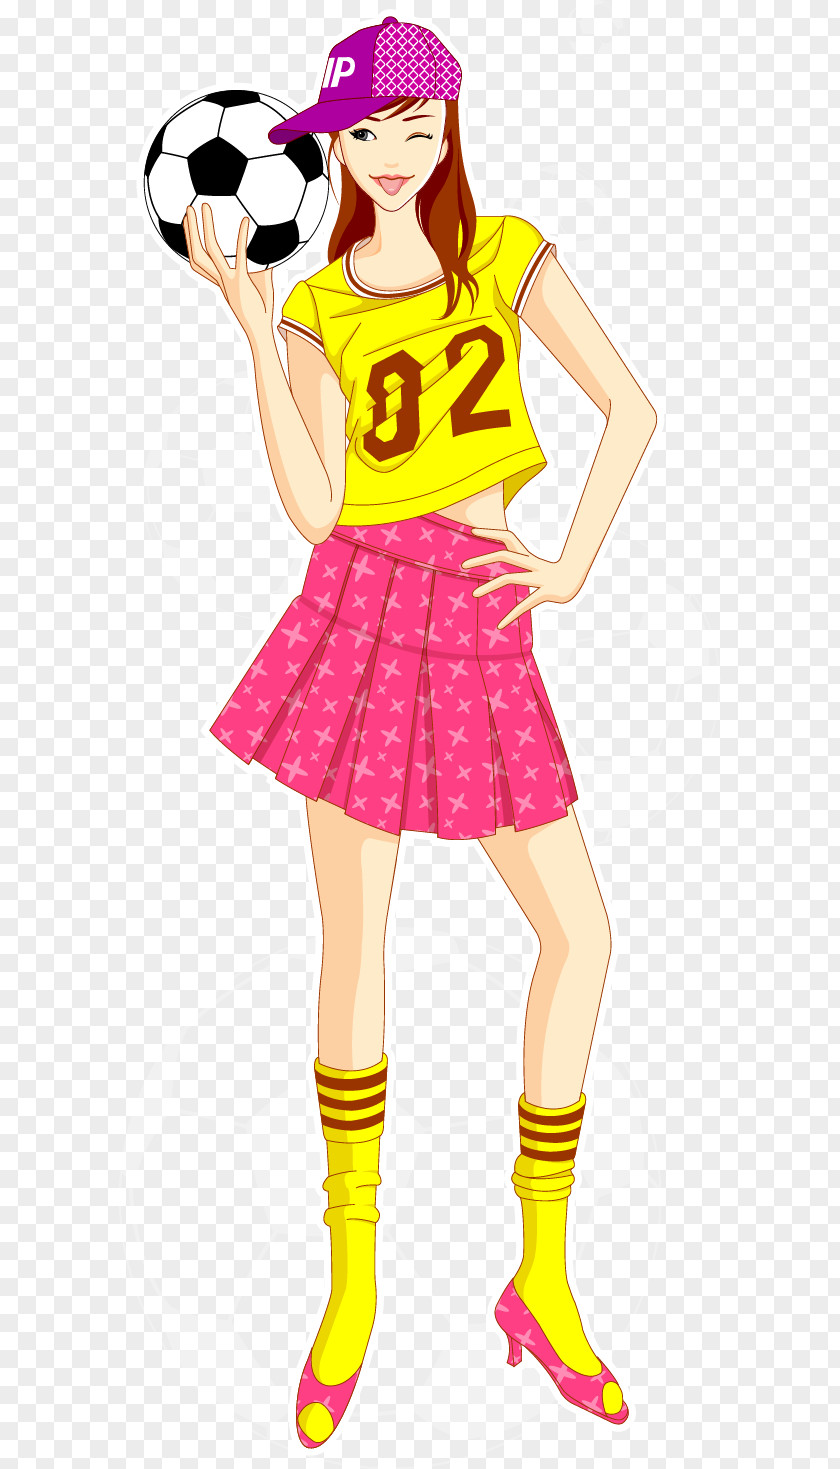 Girl Child Drawing Cuteness PNG Cuteness, Holding football girl material clipart PNG